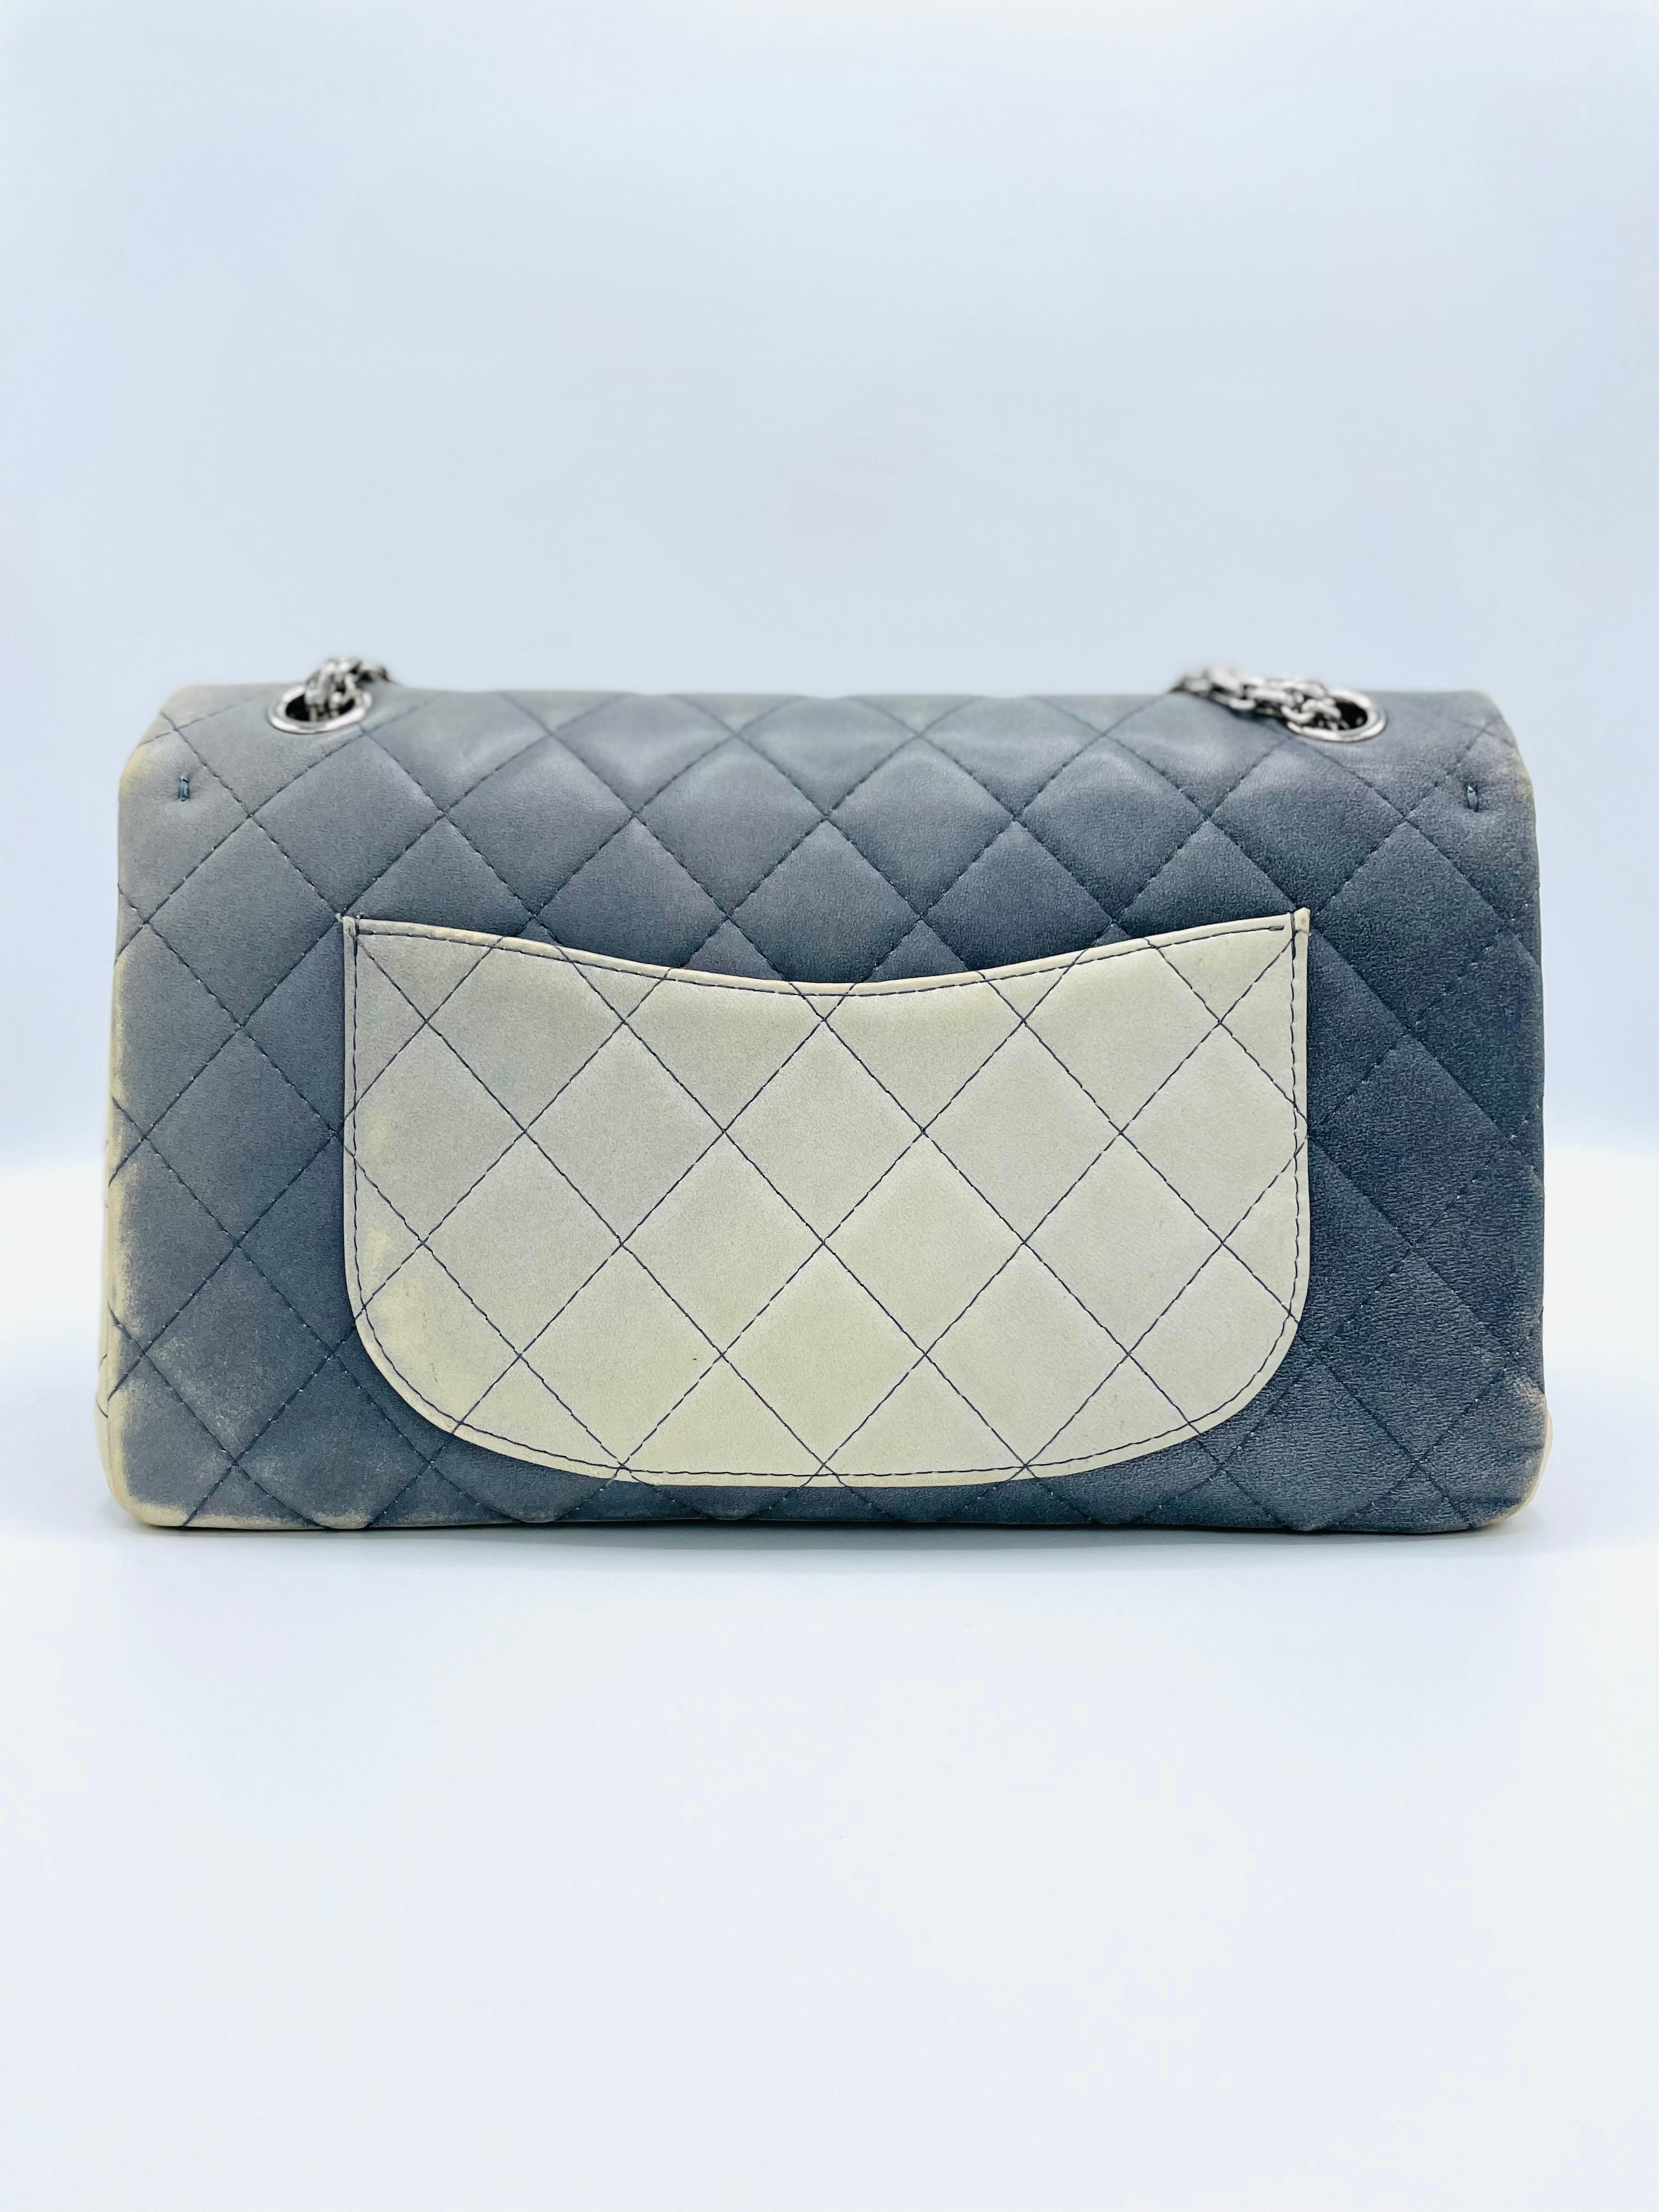 Gray Chanel Double Hybrid Degrade Ombre 2.55 Reissue 227  For Sale